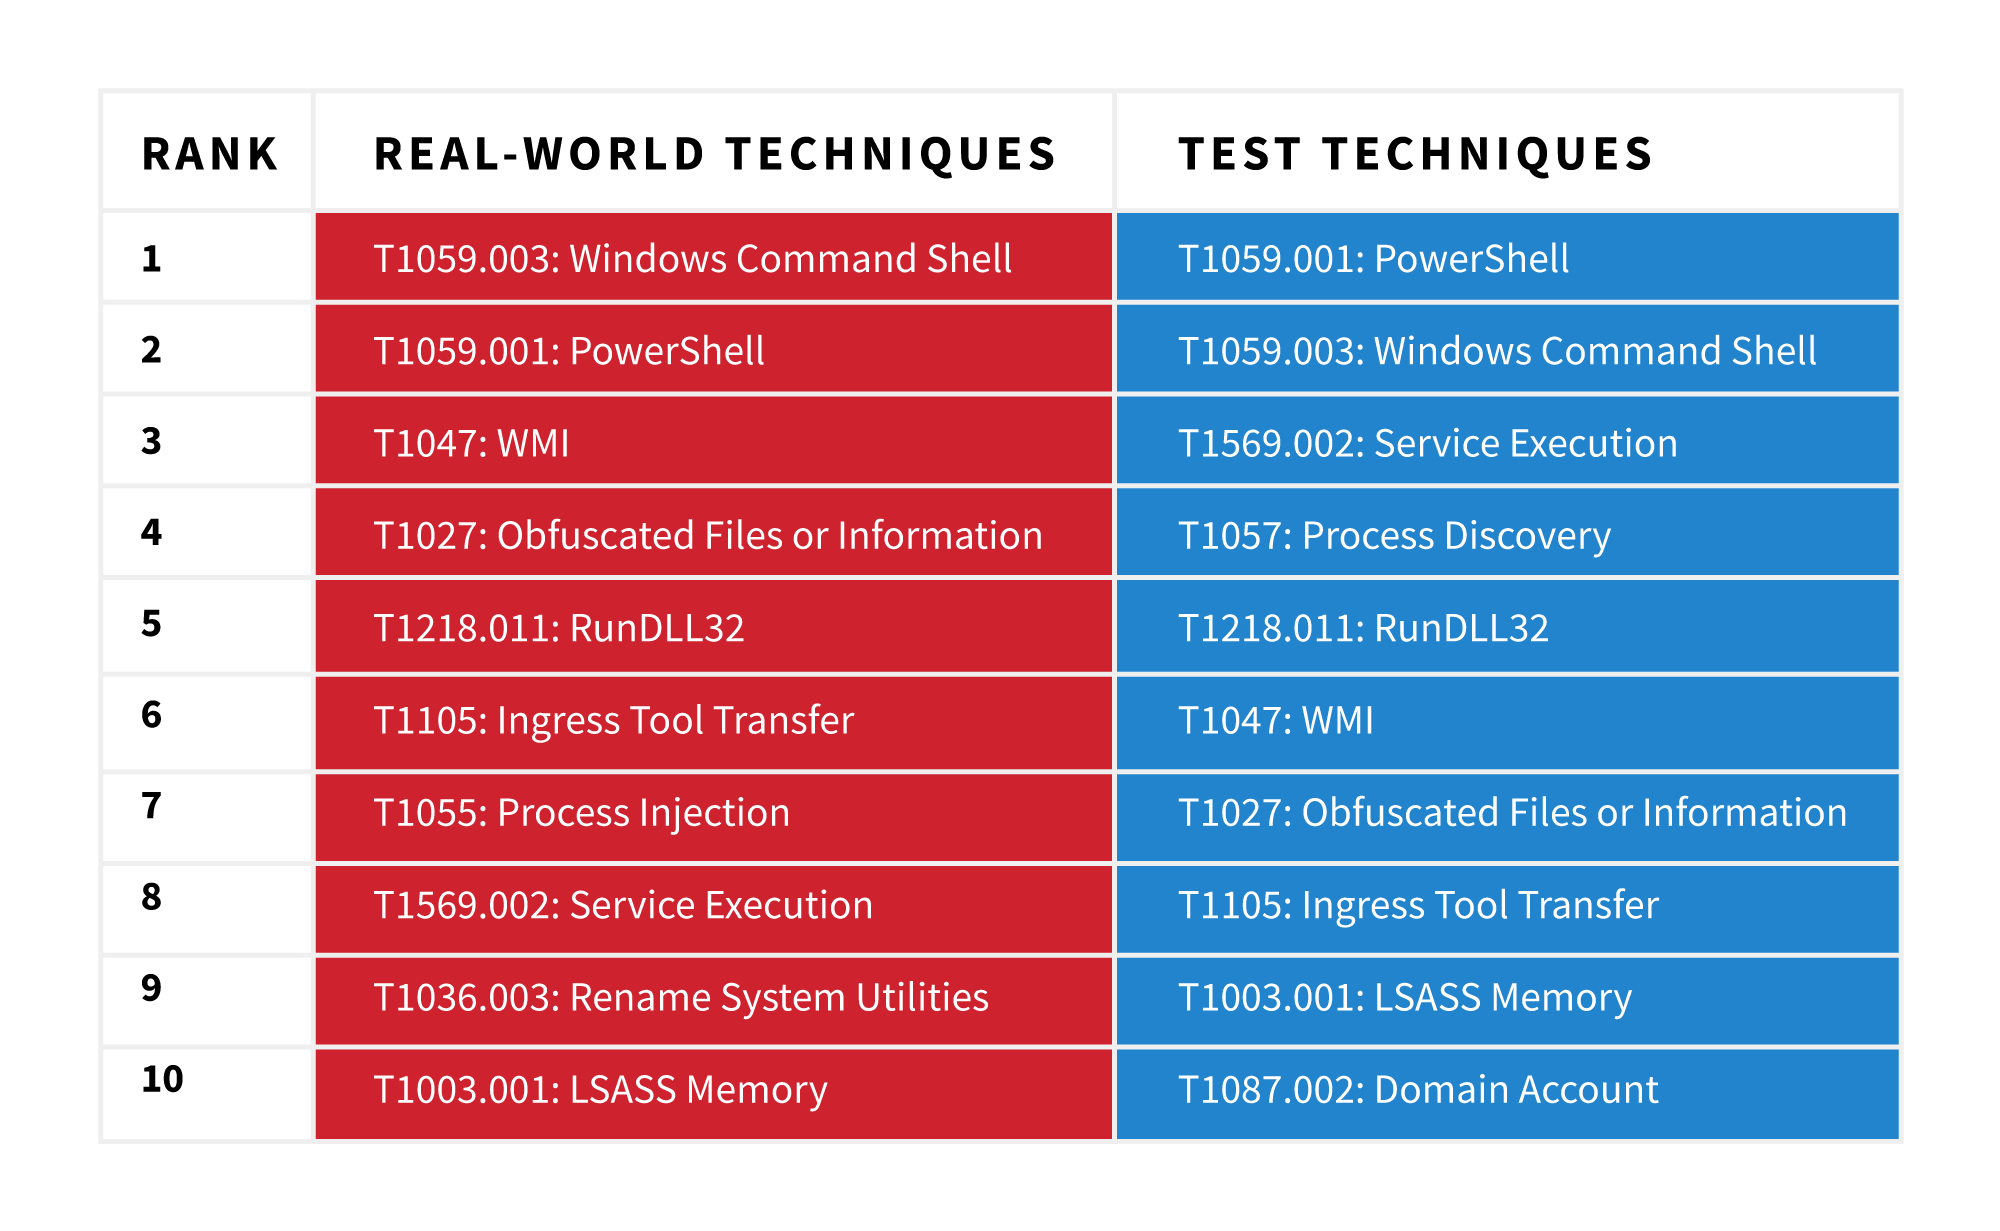 Top adversary techniques vs tested techniques 